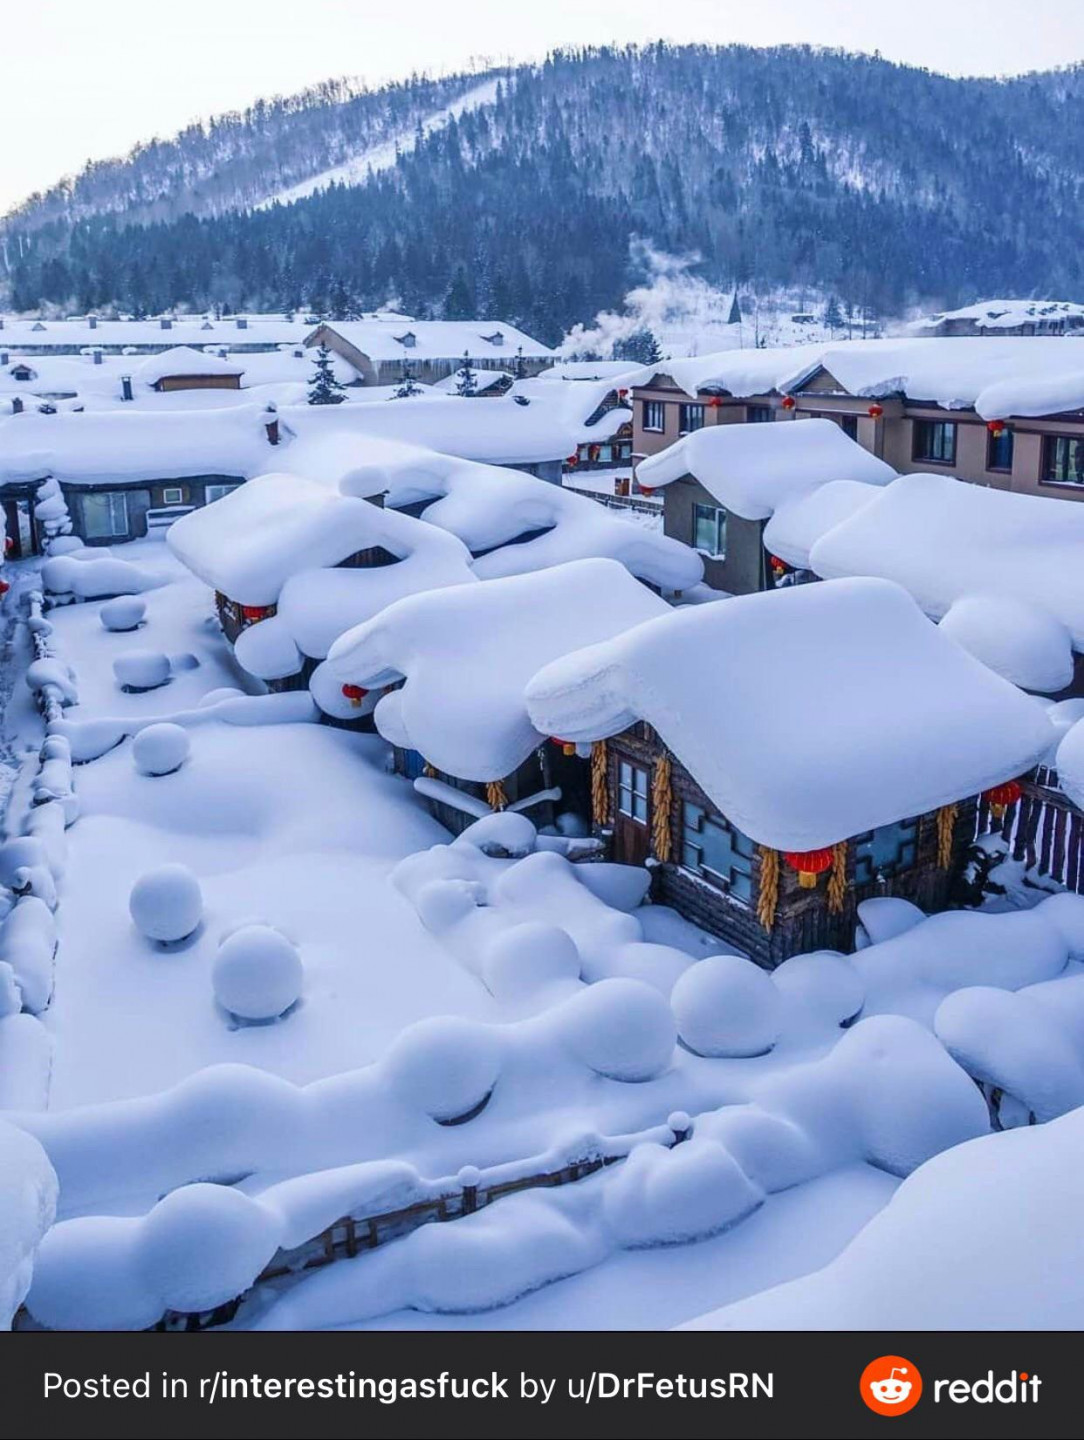 The way the snowfall covers this town